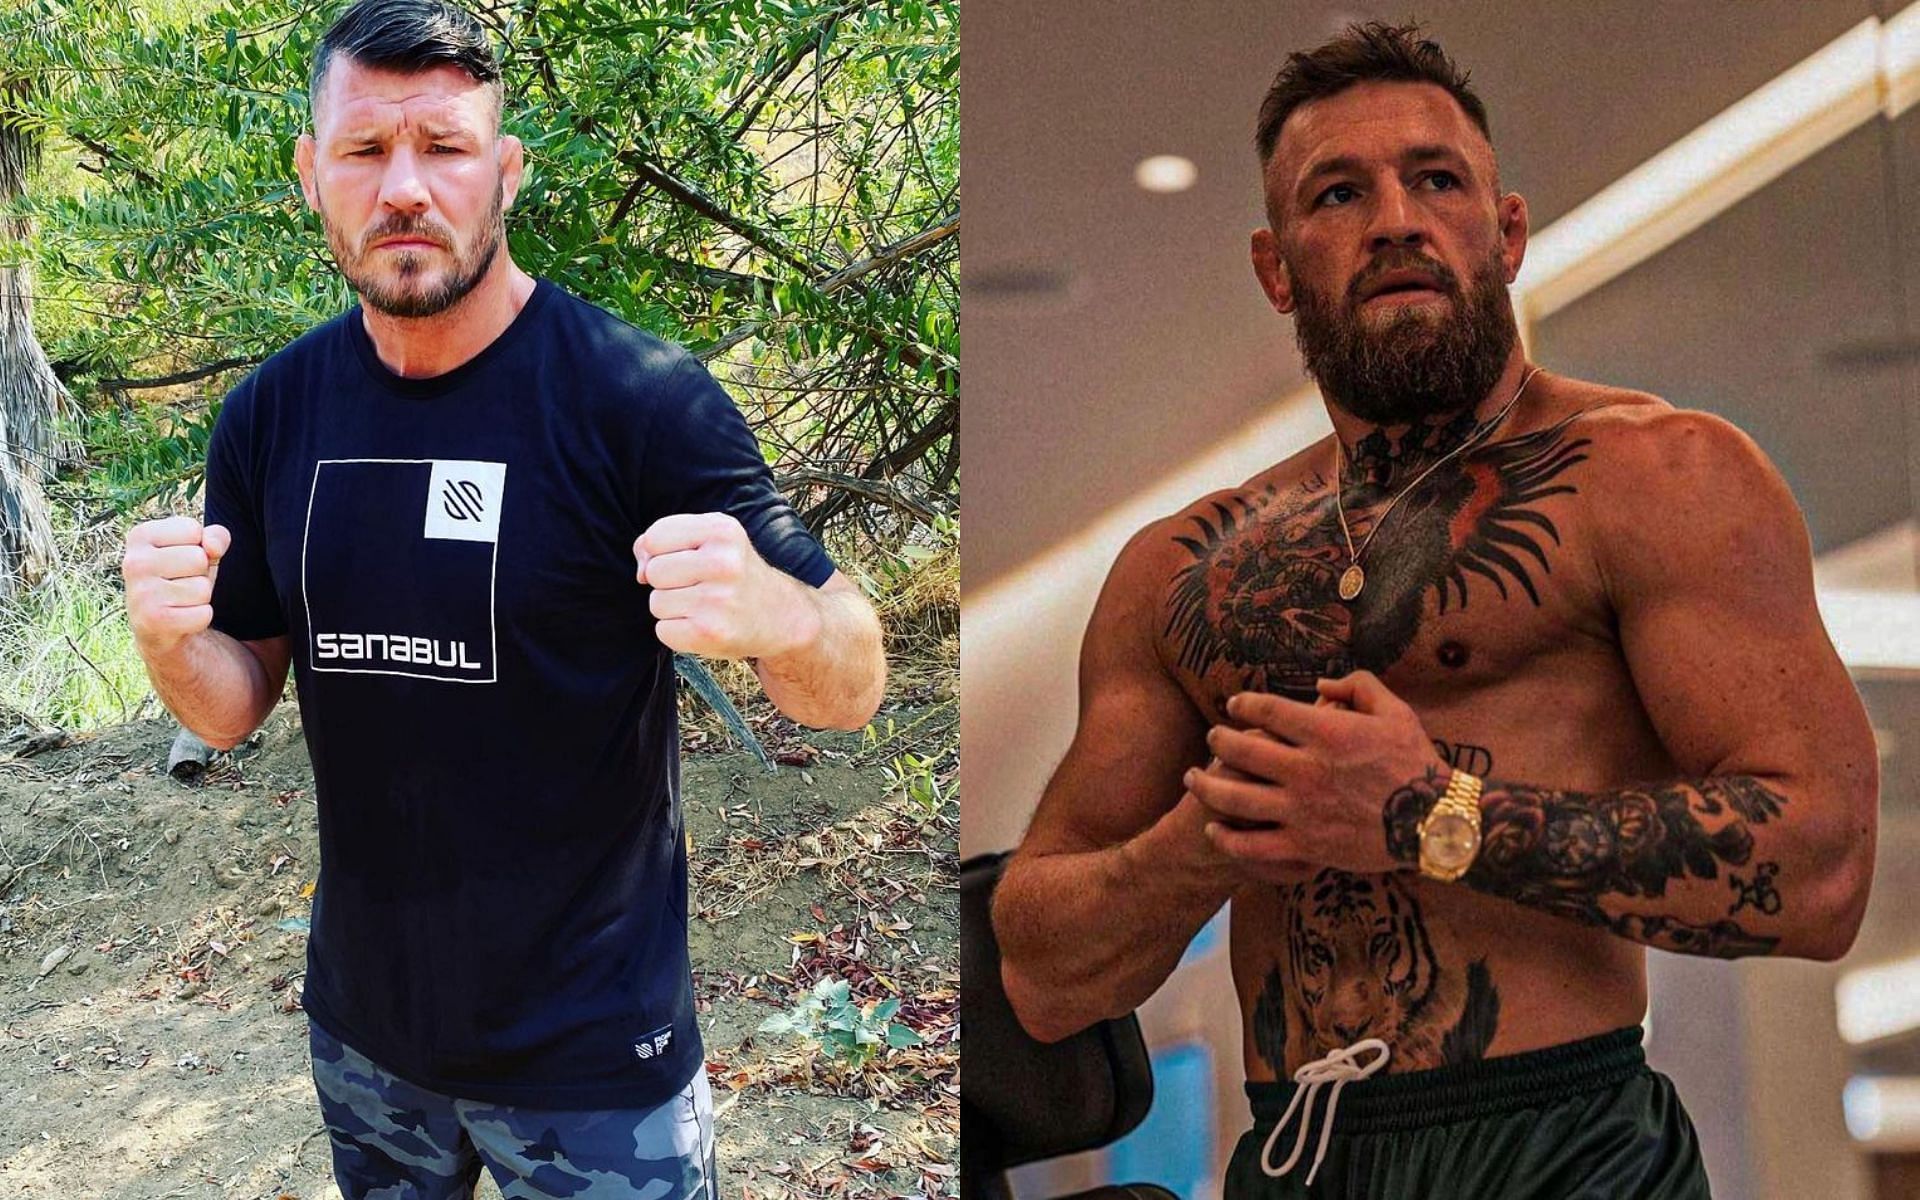 Michael Bisping (left) and Conor McGregor (right) [Image Courtesy: @mikebisping and @thenotoriousmma on Instagram]